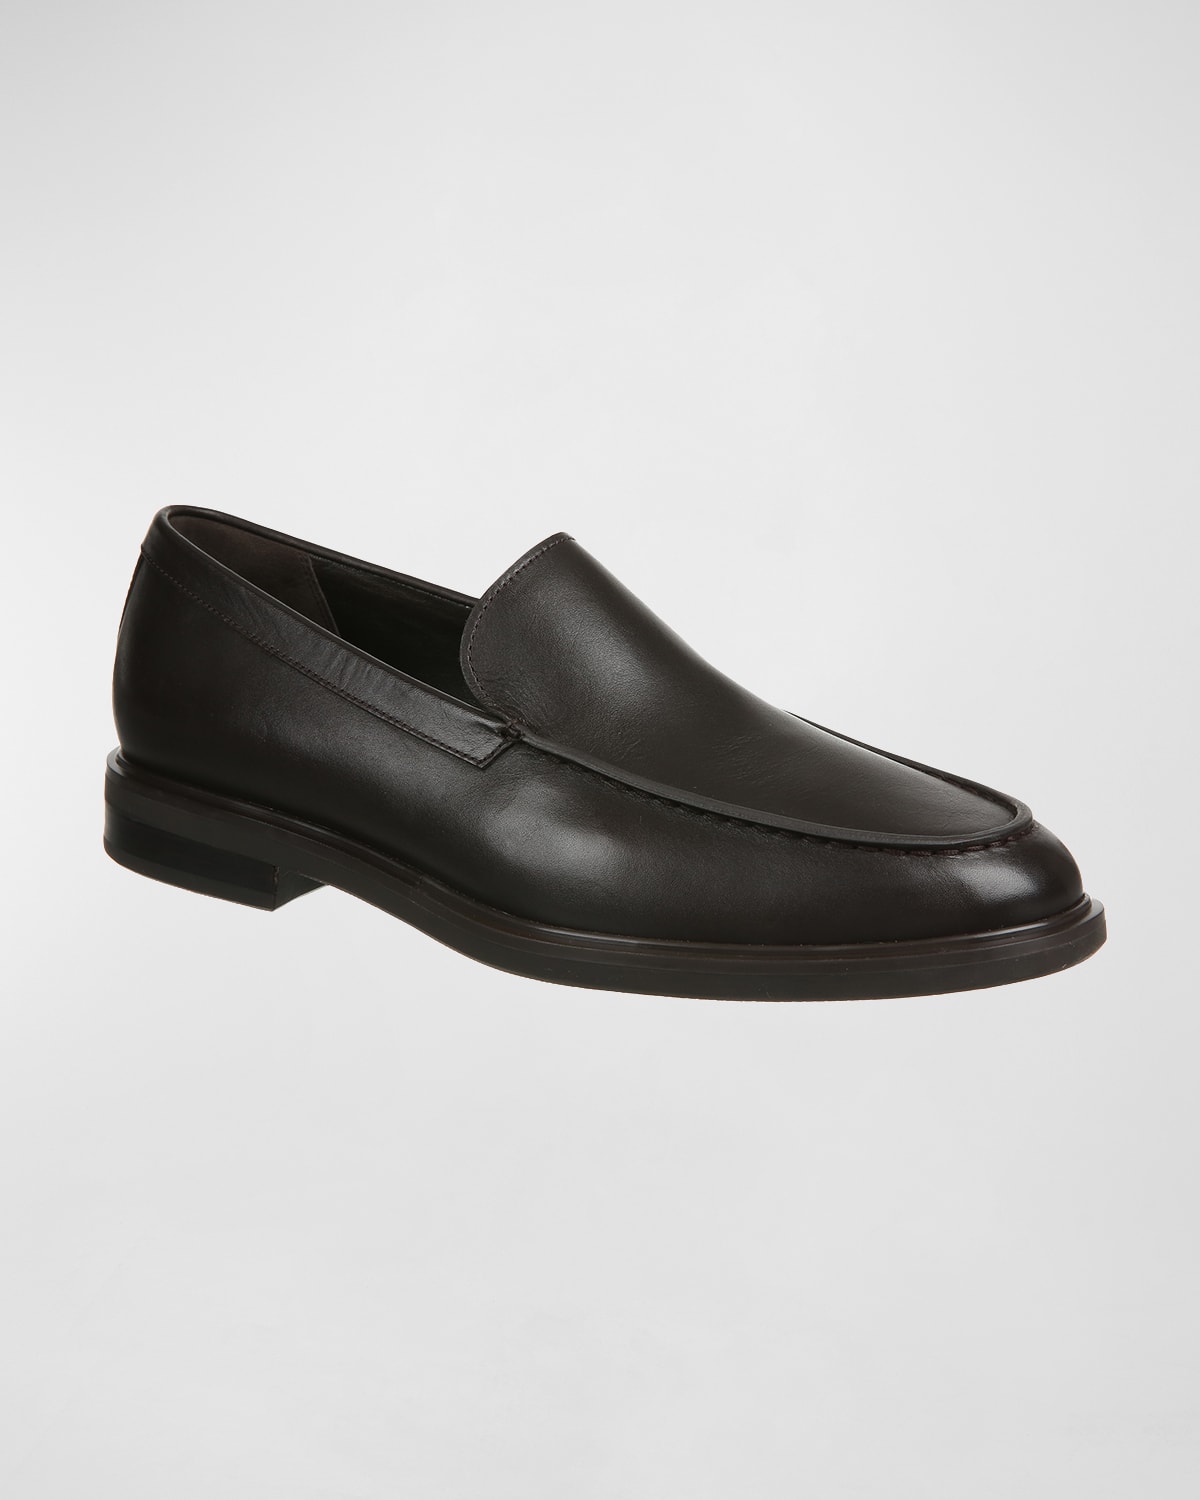 Men's "Grant" Leather Loafers